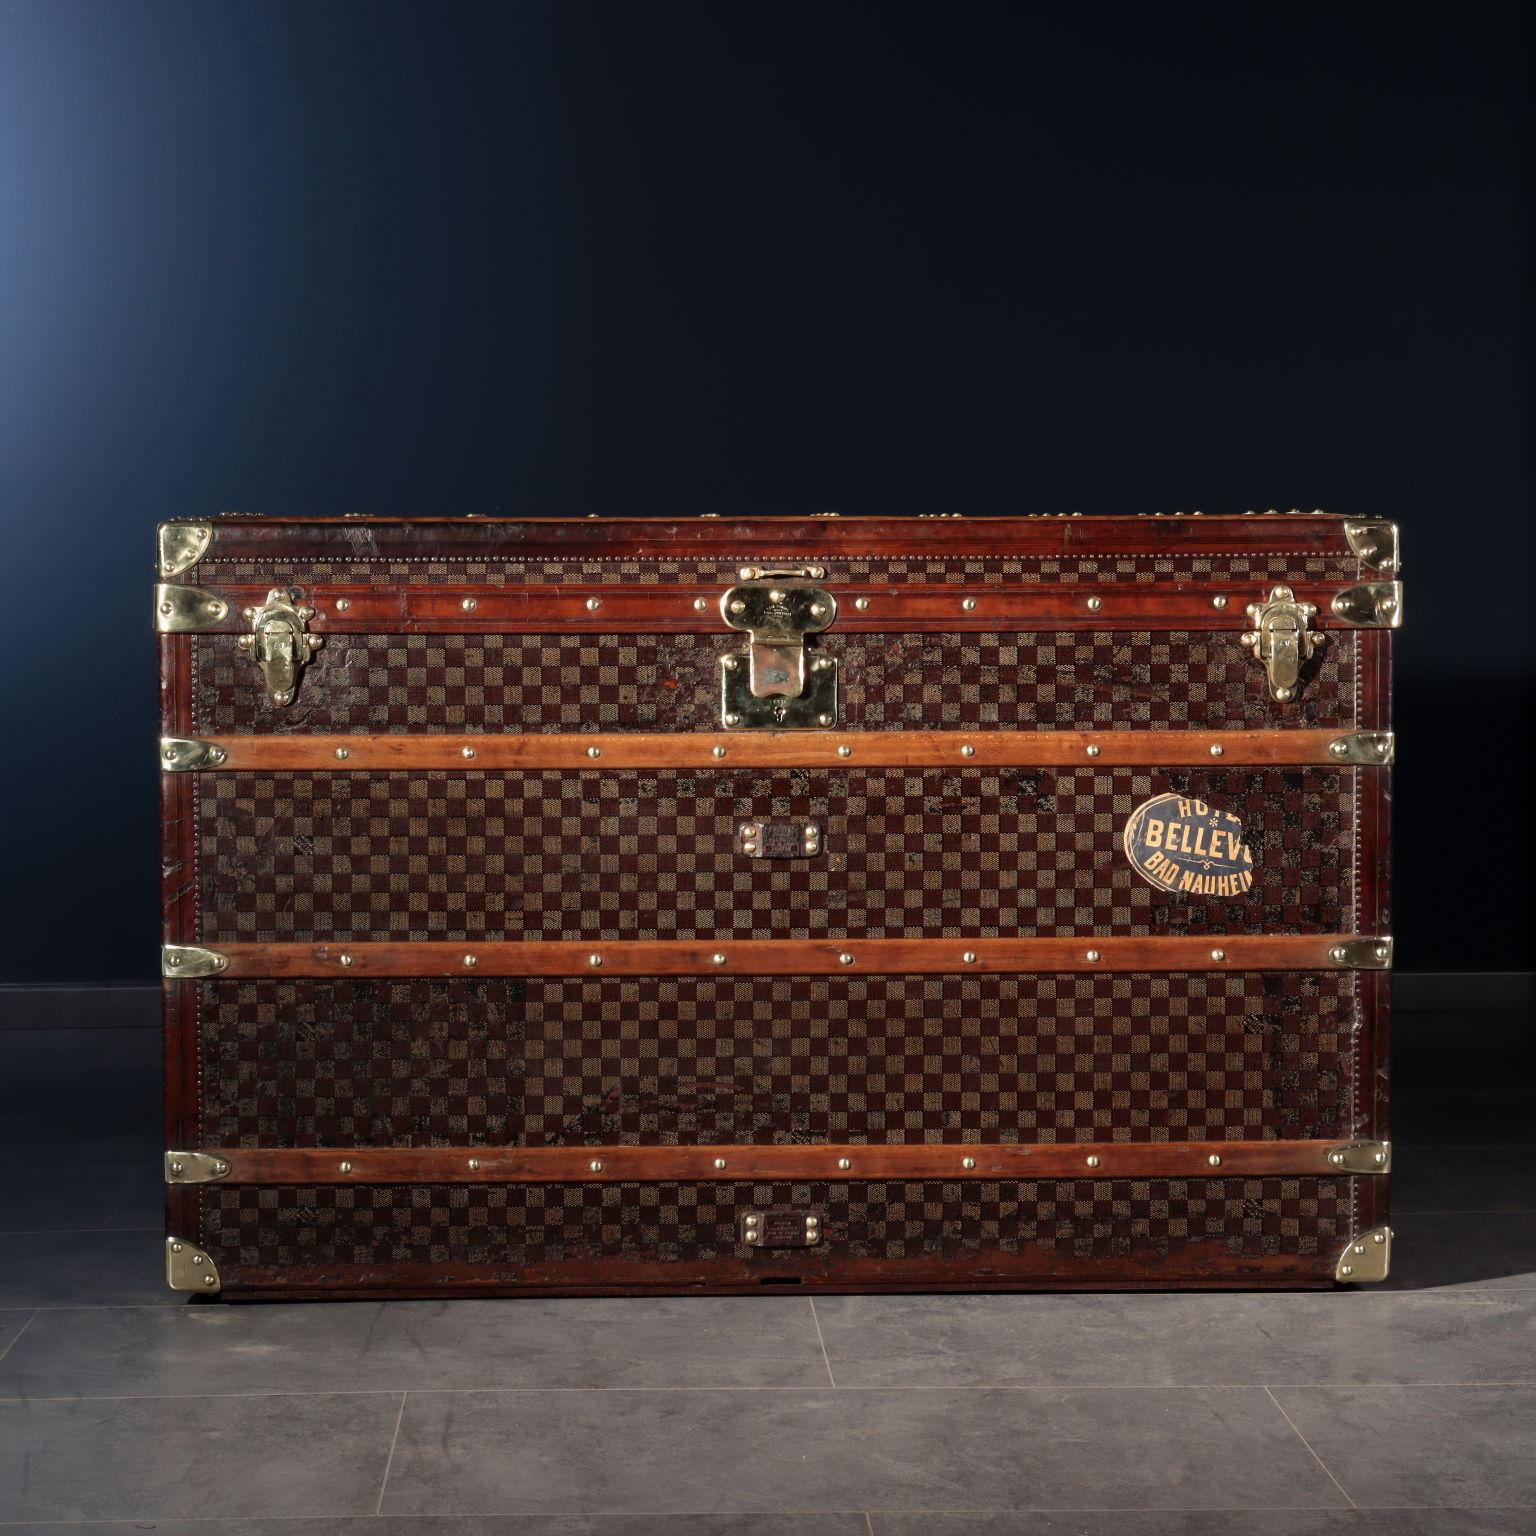 L.V. case dating back to 1890, upholstered with Damier fabric, the famous checkered brown and beige fabric, invented a few years prior by Georges Vuitton, Louis' son.
It is a pretty big men's case, commissioned to endure long trips. The interior is